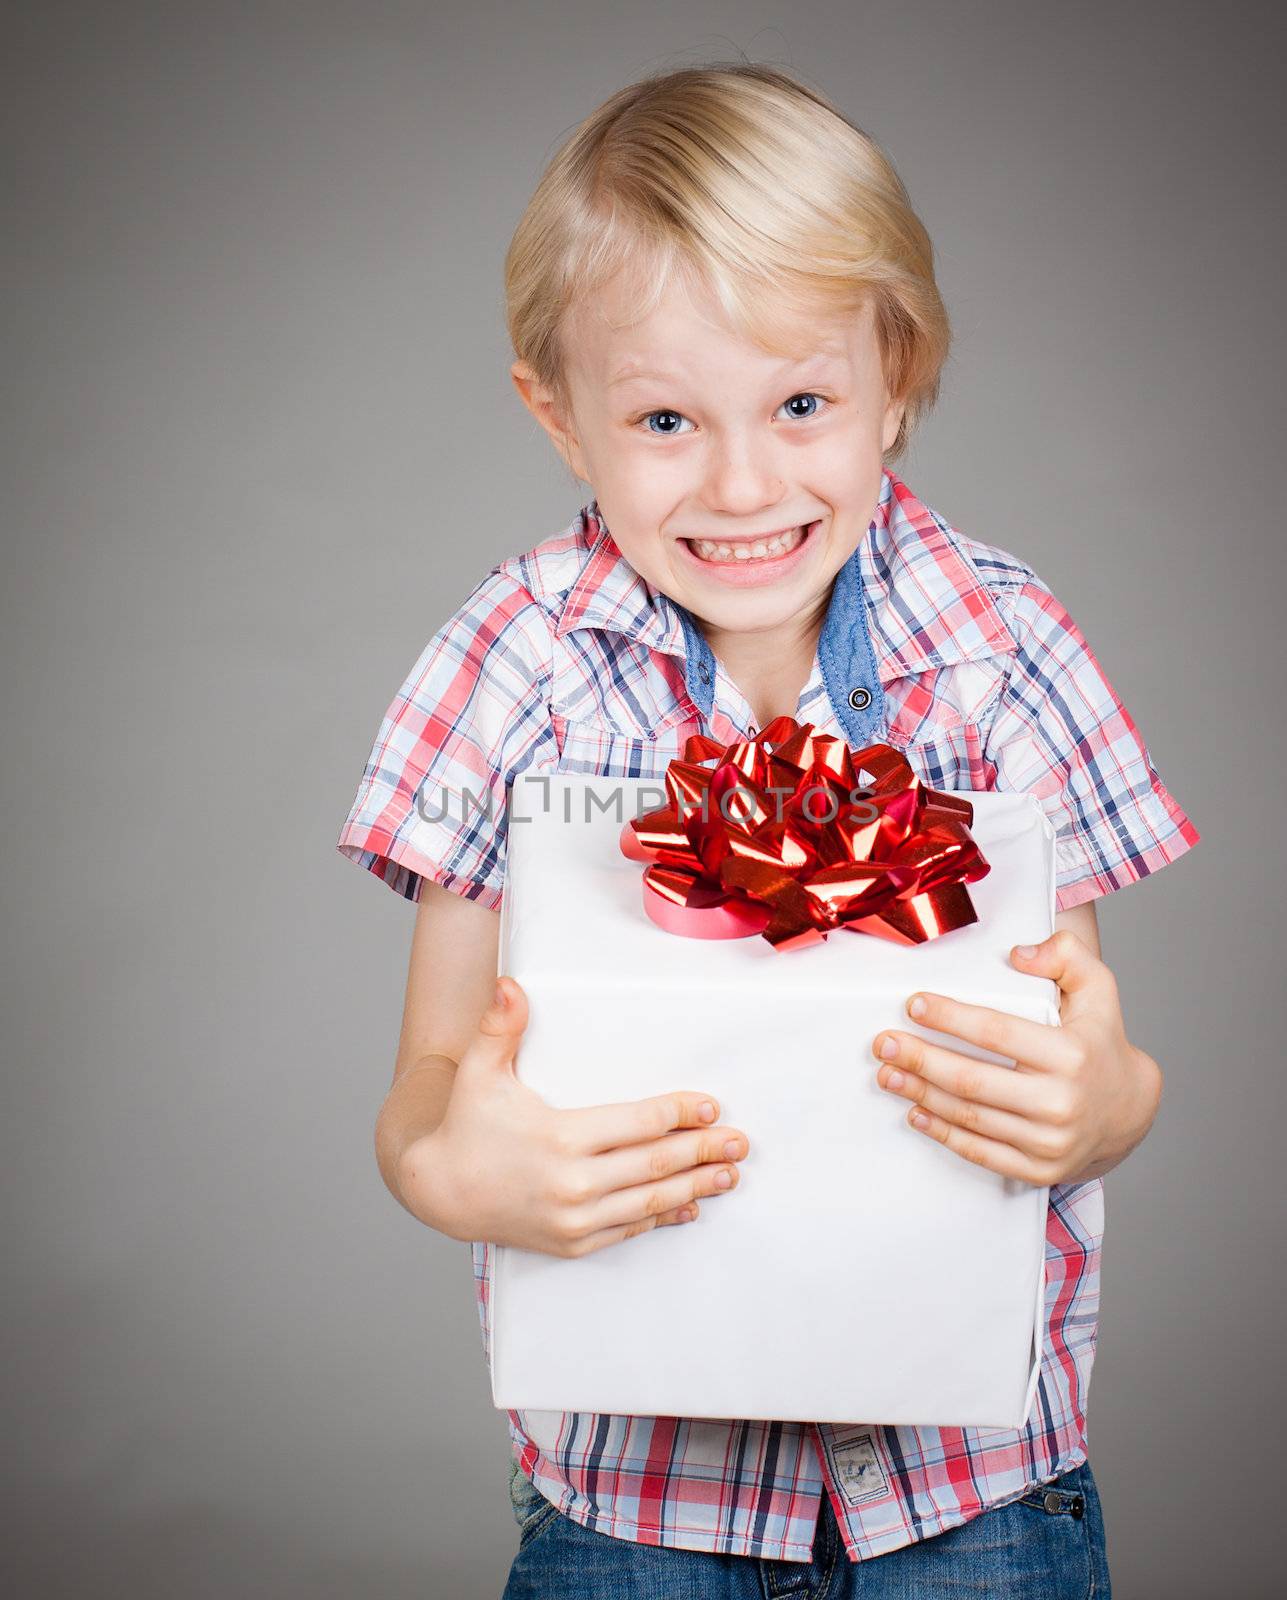 A very happy cute young boy holding a large gift or present and smiles at camera.